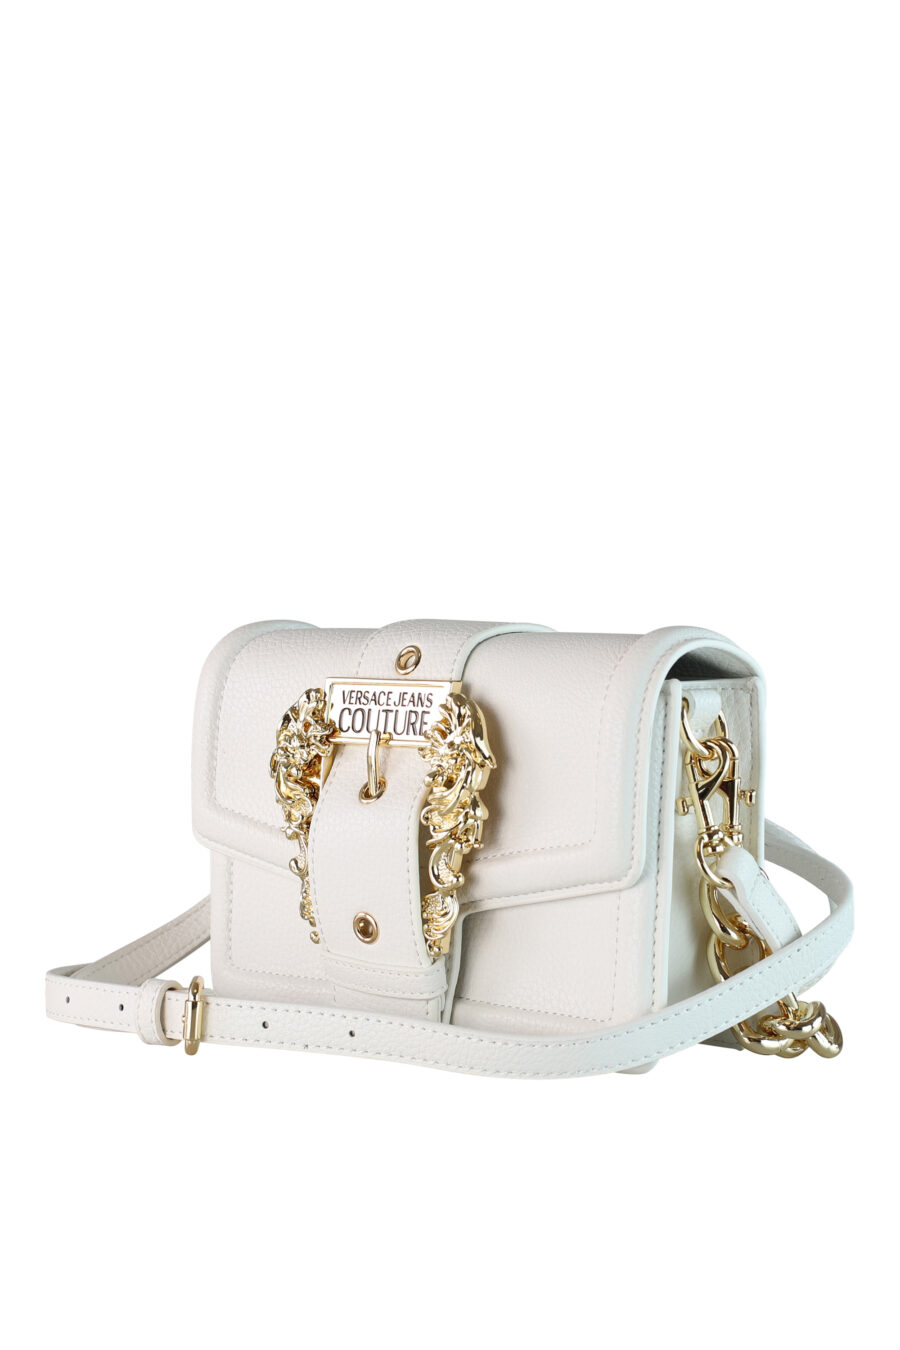 White shoulder bag with chain and baroque buckle - IMG 0448